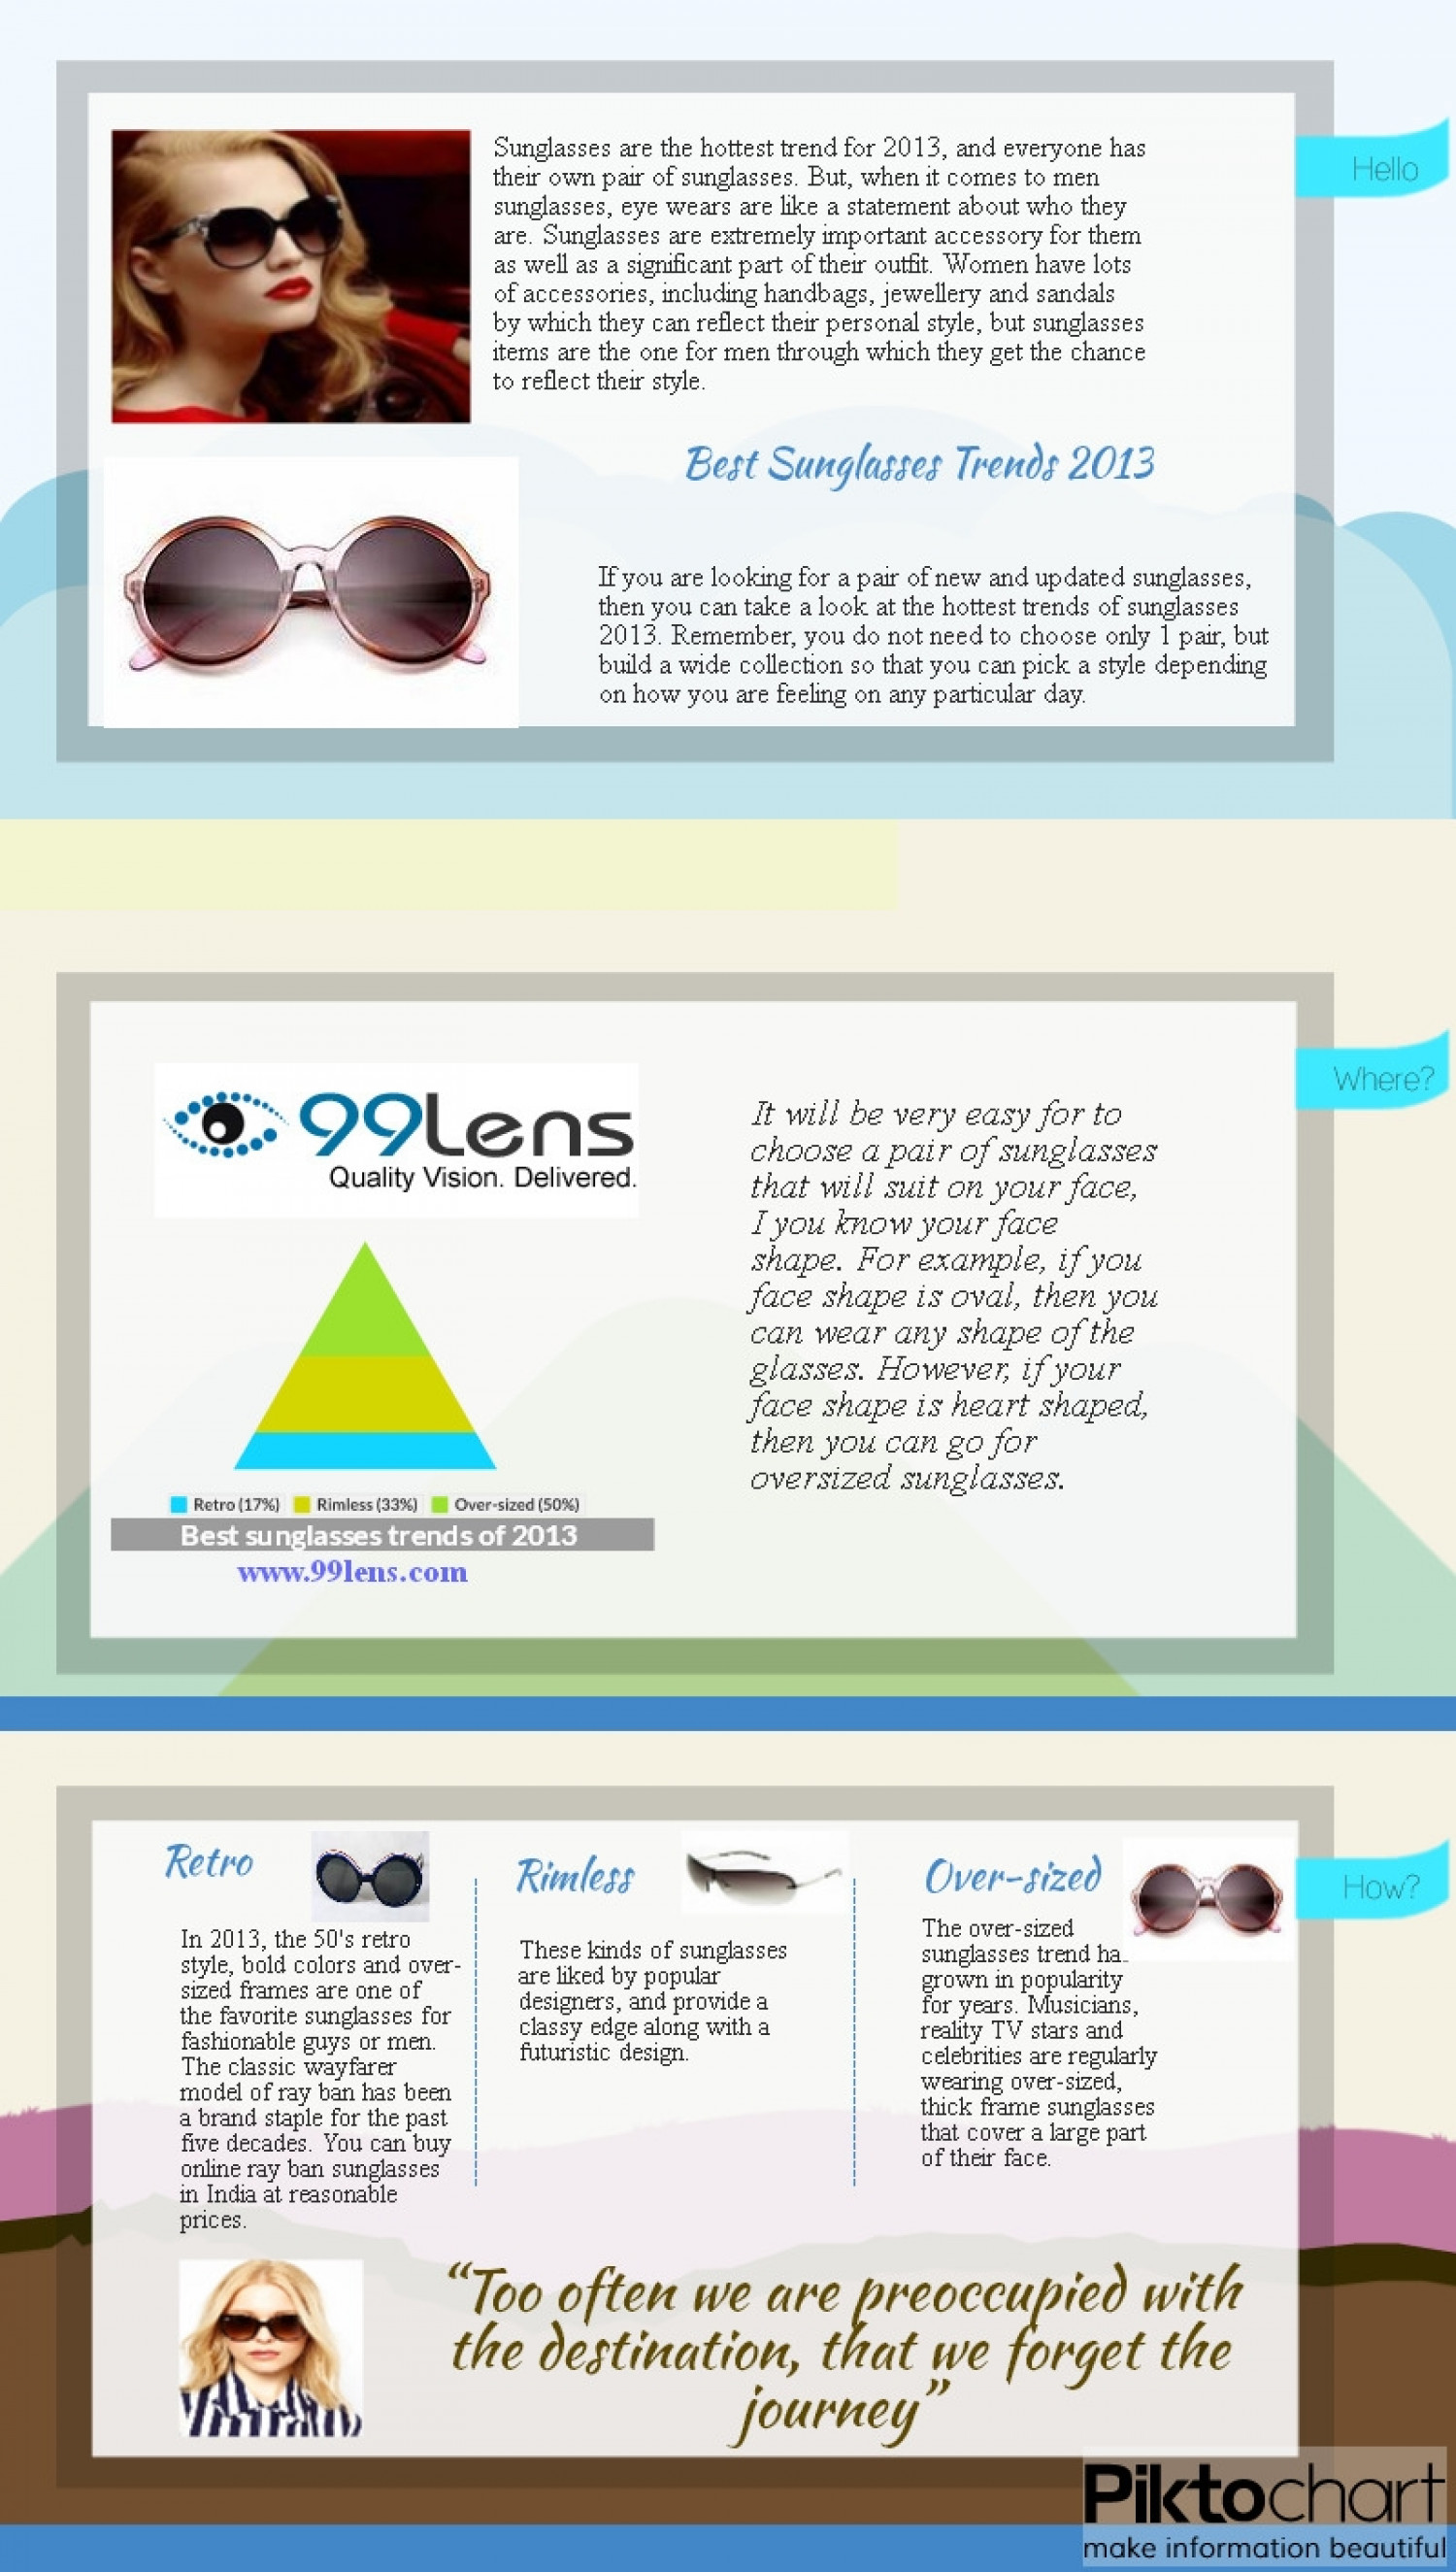 Top Three Best Sunglasses Trends 2013 for Men Infographic